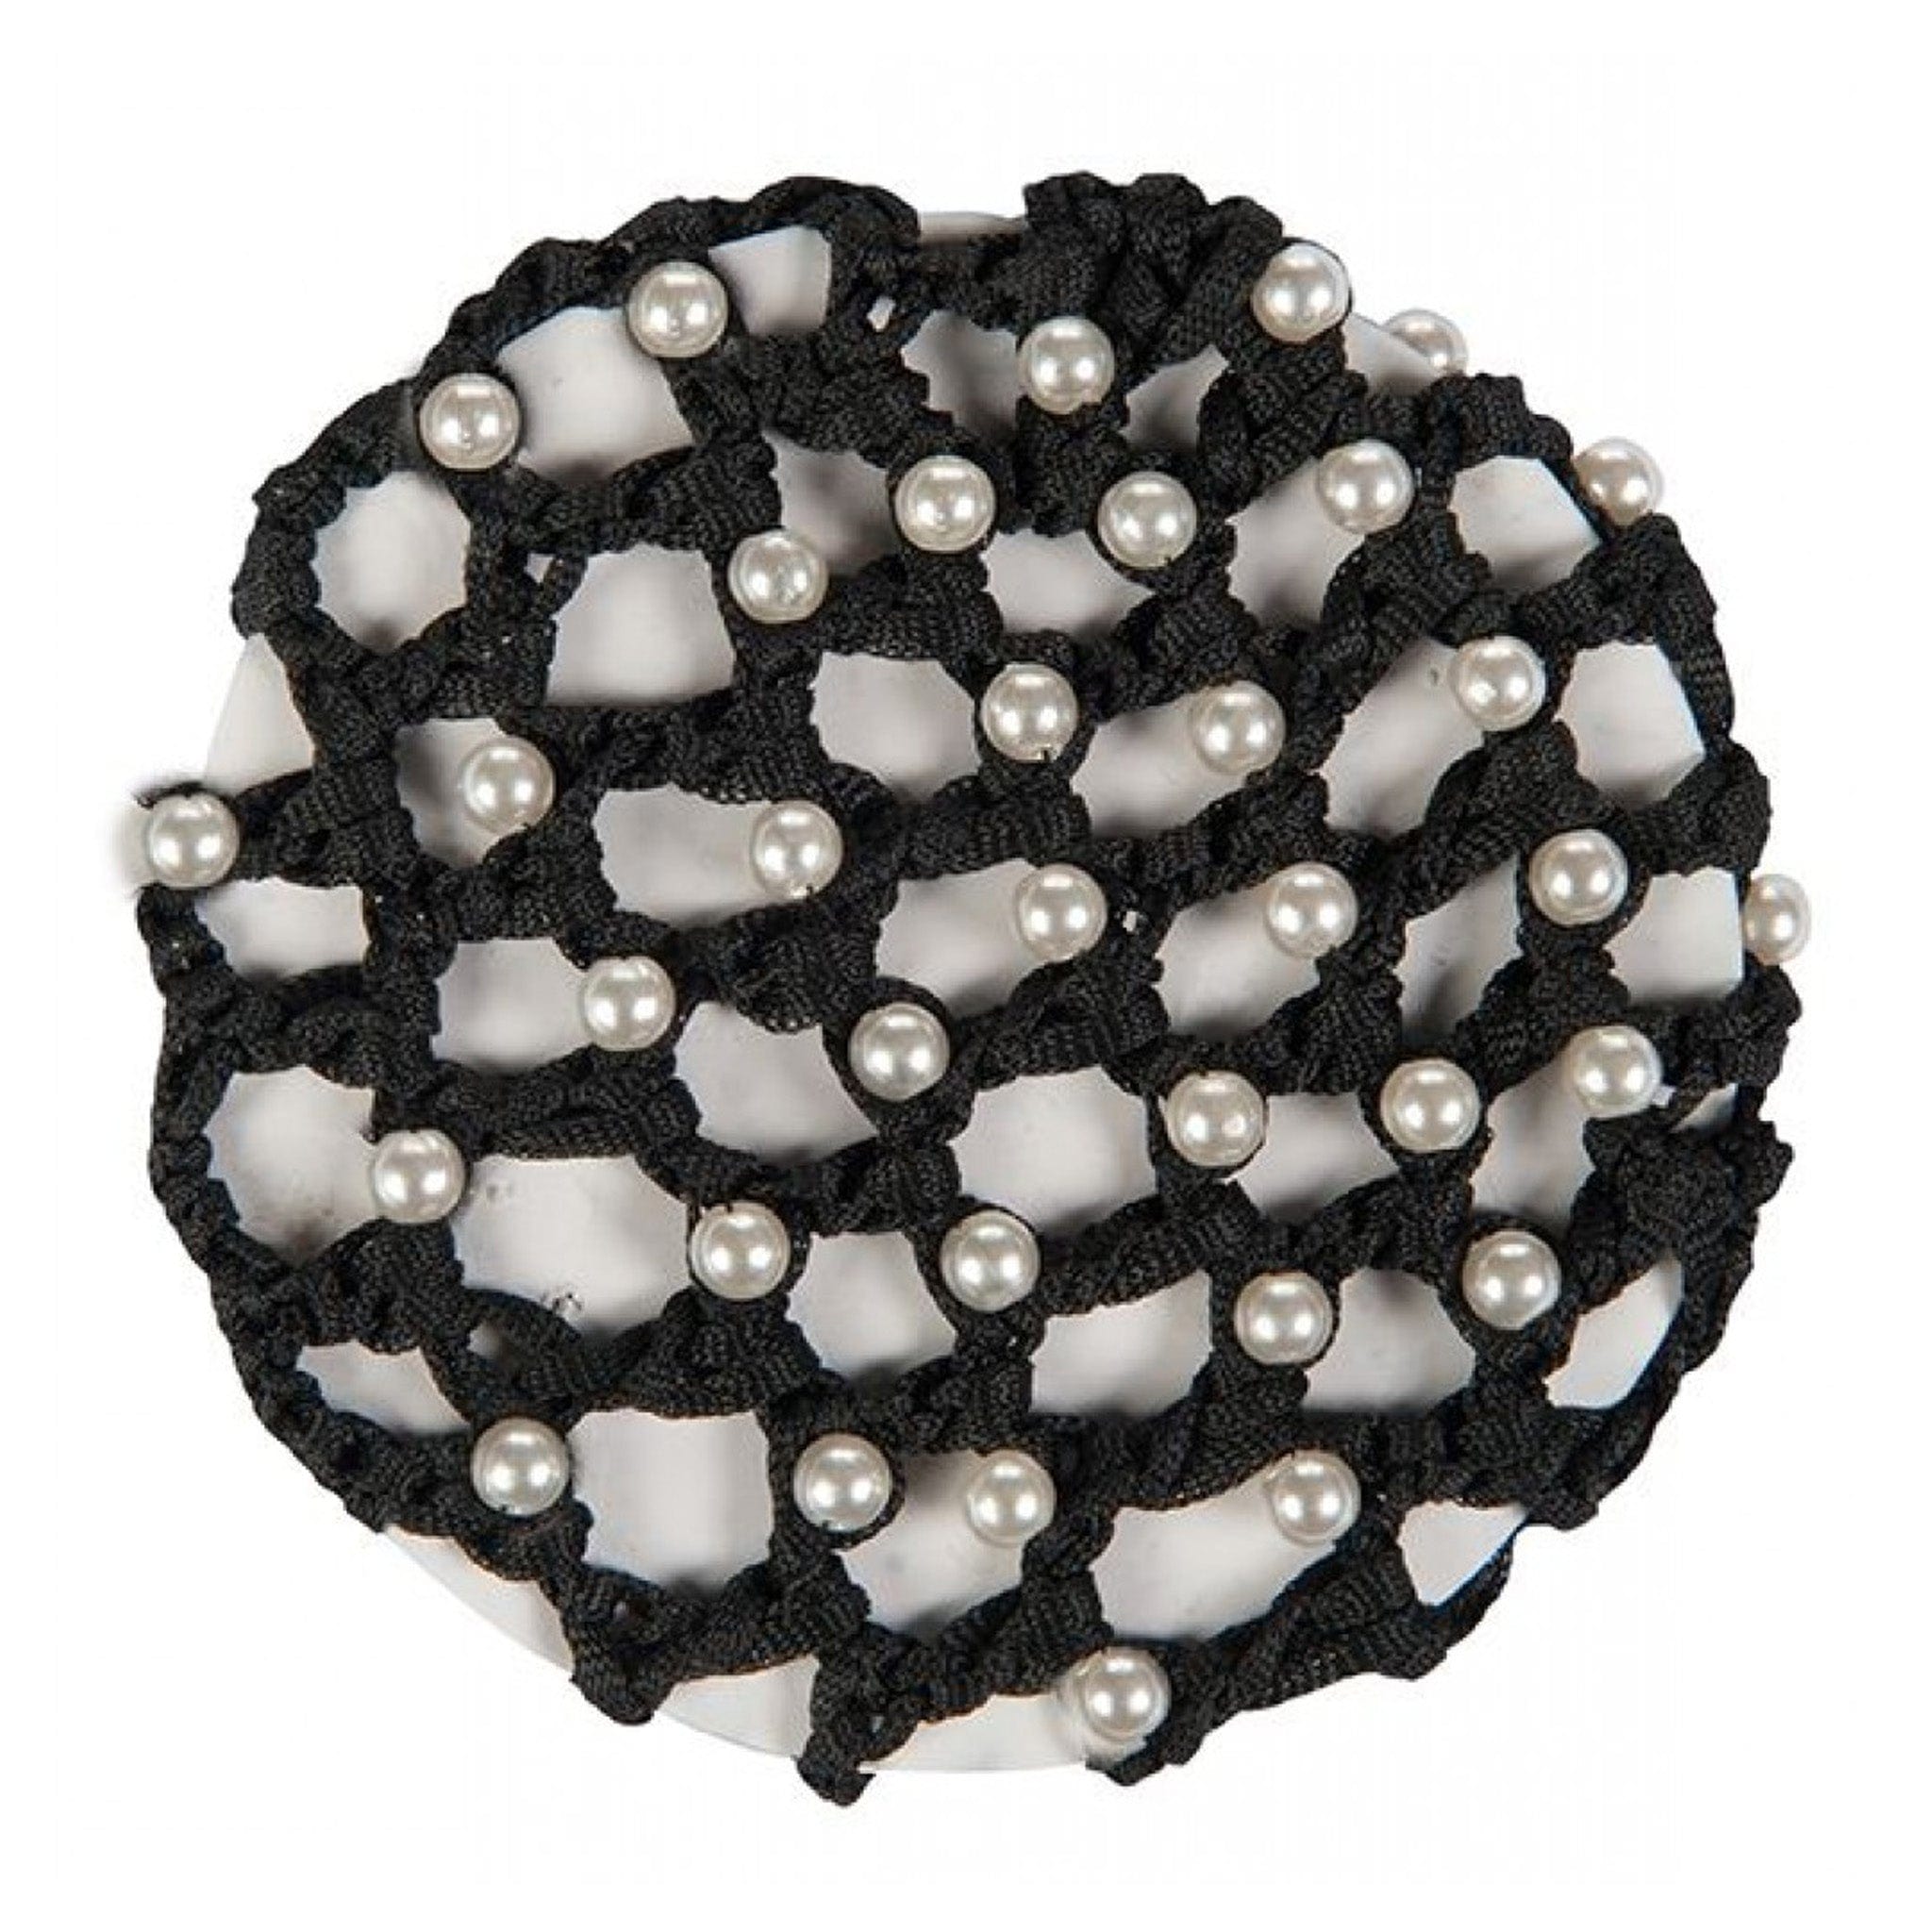 HKM Hair Net With Imitation Pearls 11395 Black With White Pearls